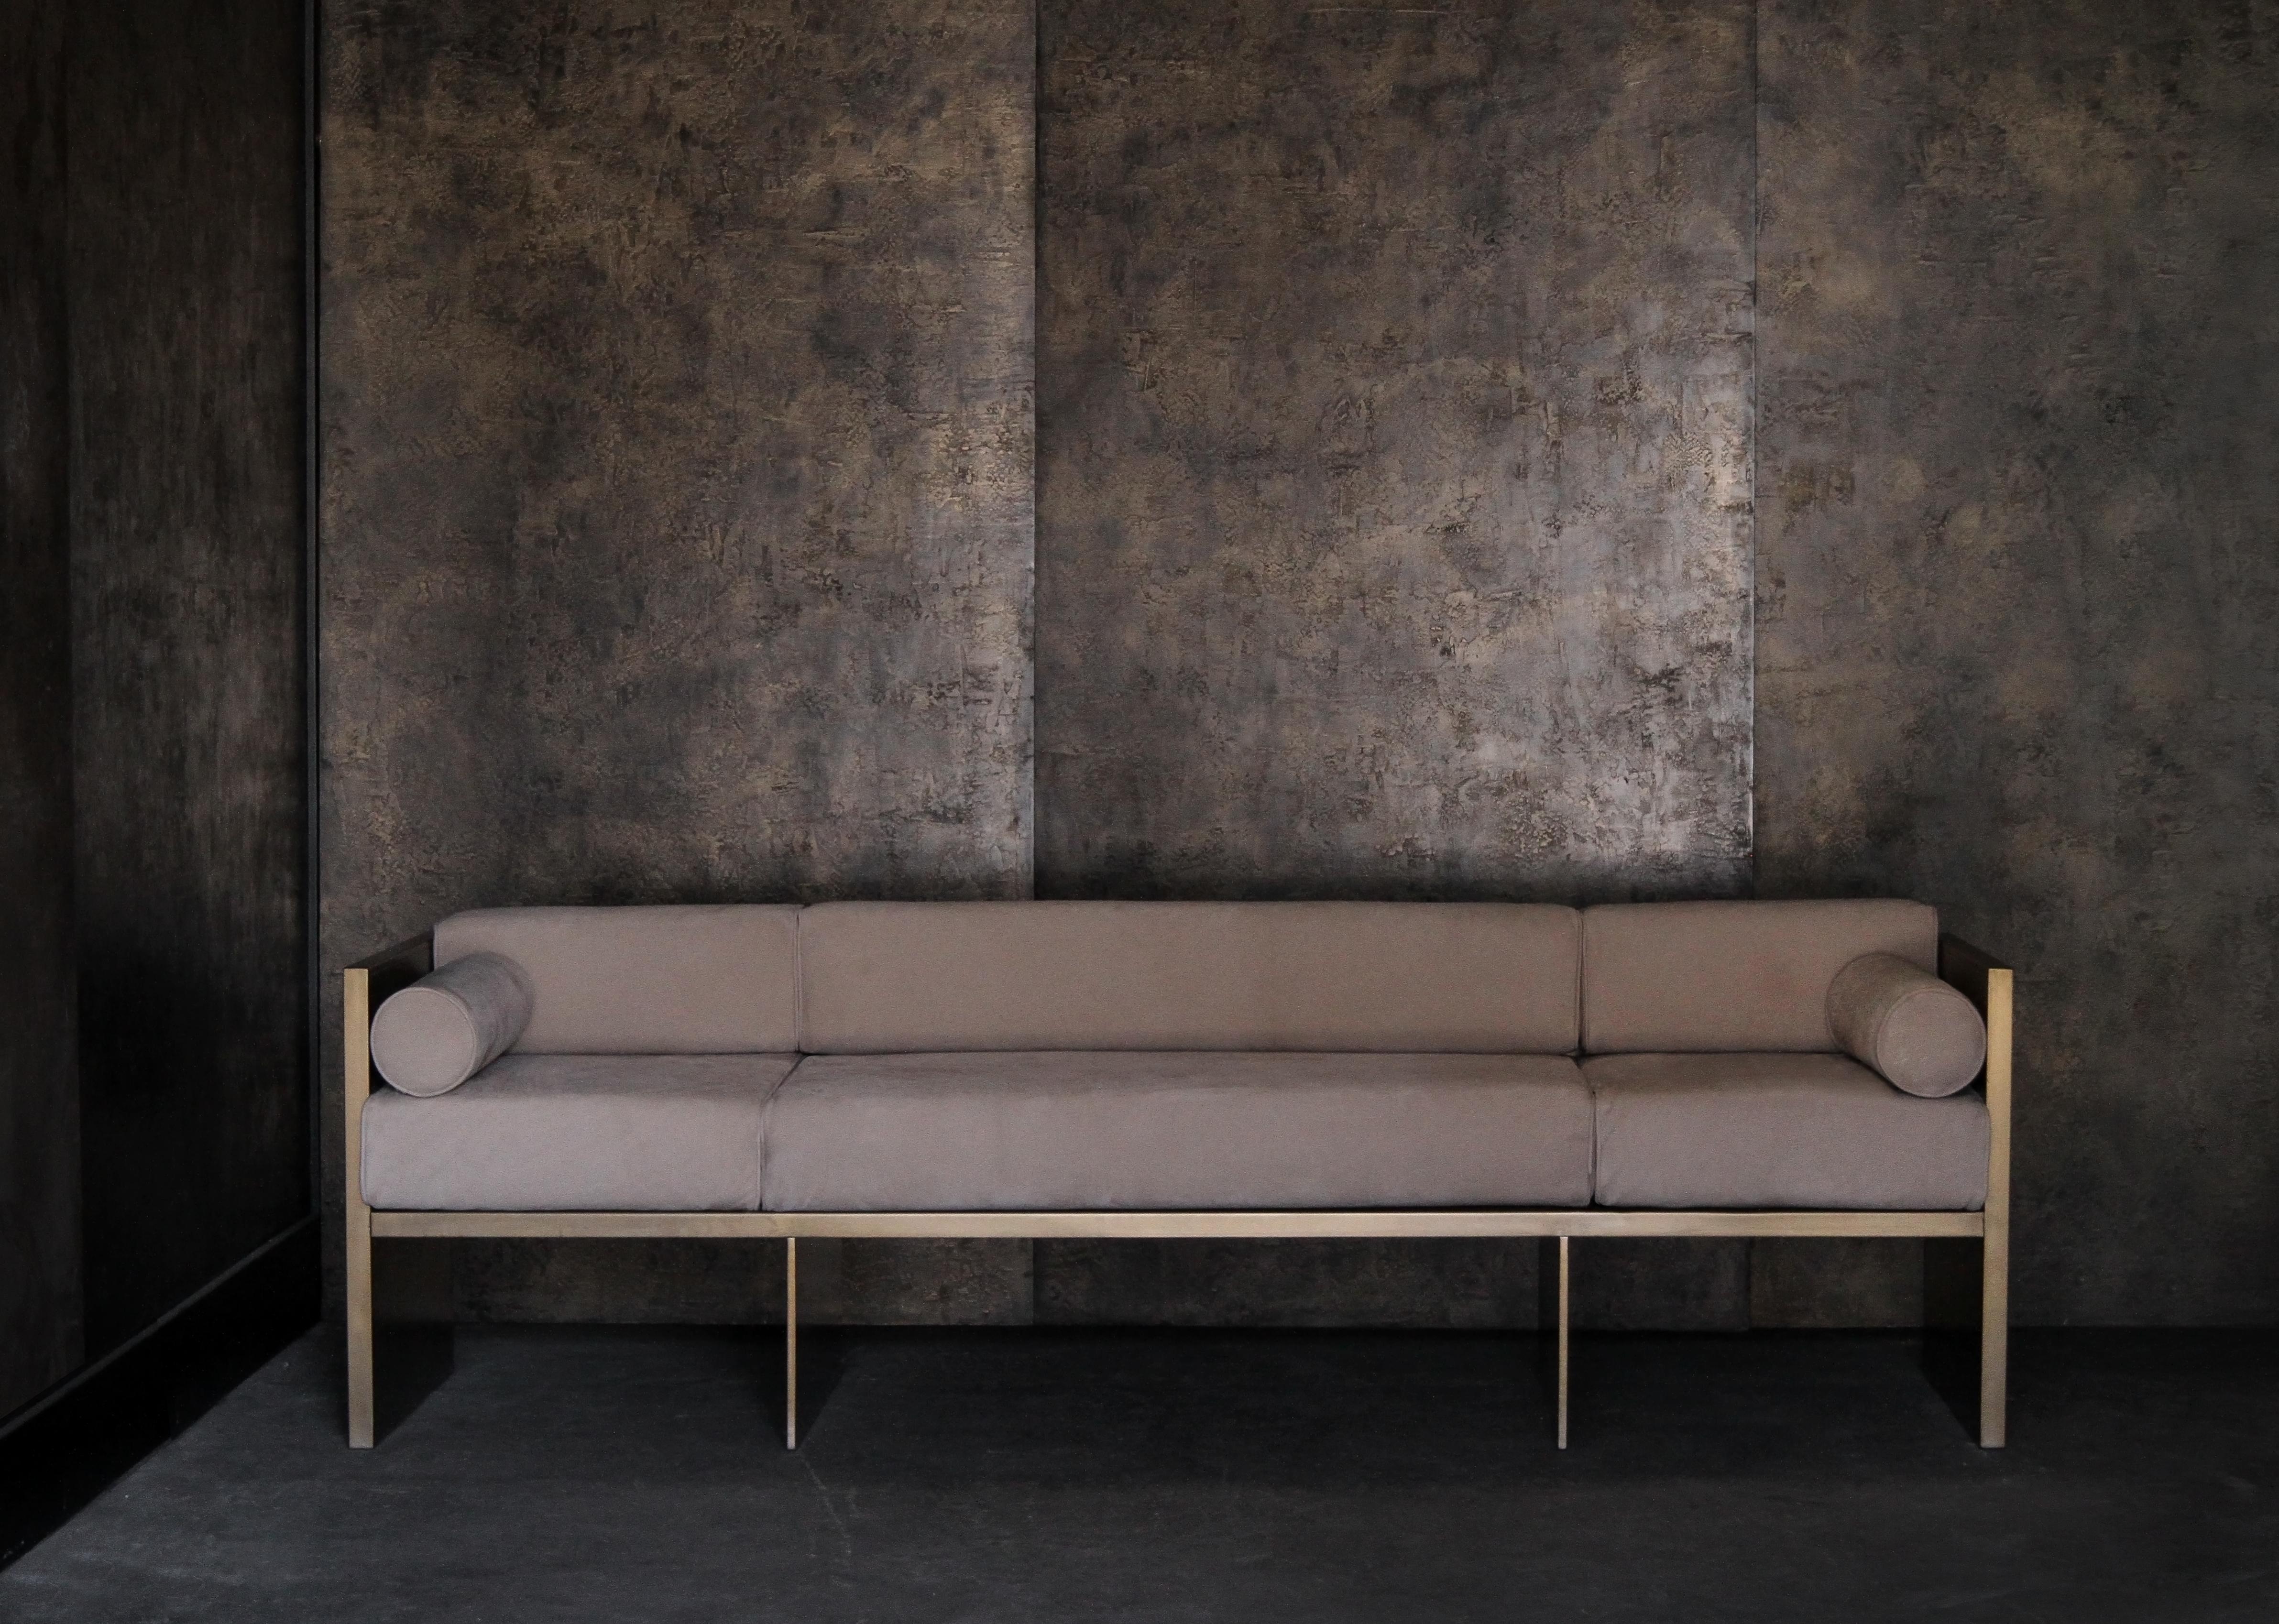 The (wh)ORE HAüS STUDIOS Stone Sofa is made of steel, marble and leather. This piece is made to order and can, therefore, be customized. 

(wh)ORE HAüS STUDIOS is a female run and operated design studio based in Downtown Los Angeles. Founded by a